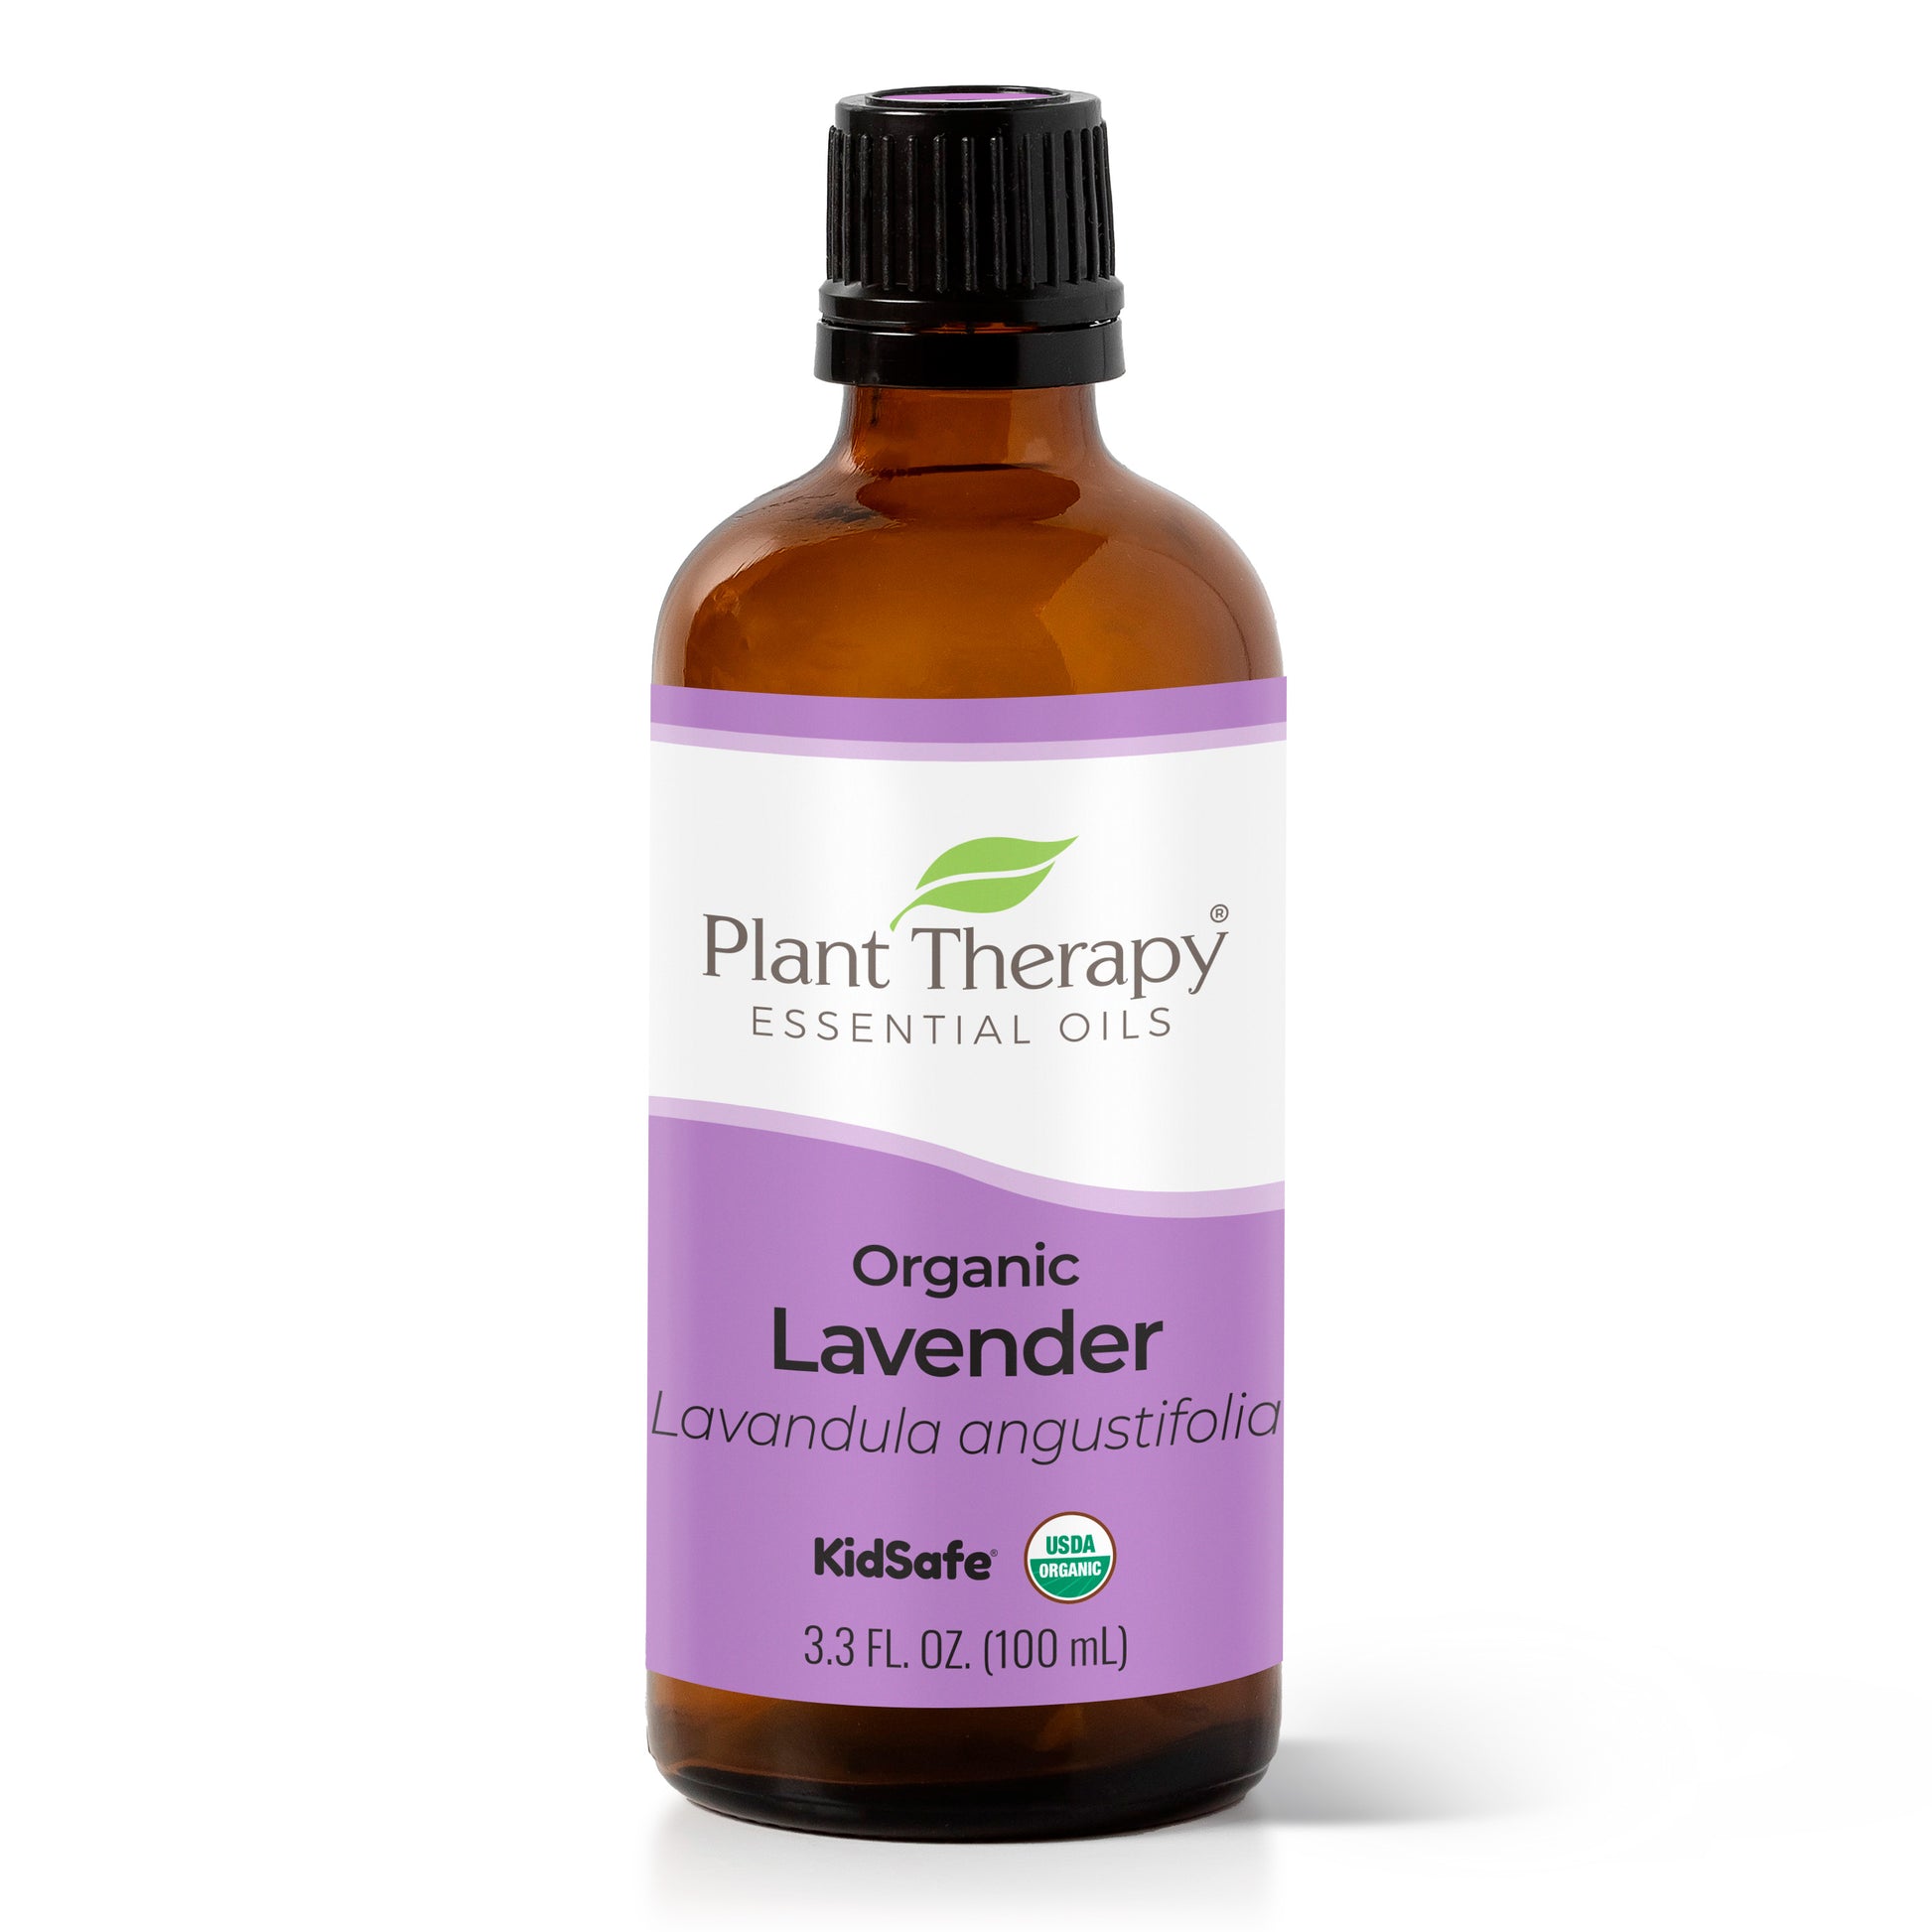 Plant Therapy Top 6 USDA Organic Essential Oil Set - Lavender, Peppermint,  Eucalyptus, Lemon, Tea Tree 100% Pure, Natural Aromatherapy, for Diffusion  & Topical Use, Therapeutic Grade 10 mL (1/3 oz) : Health & Household 